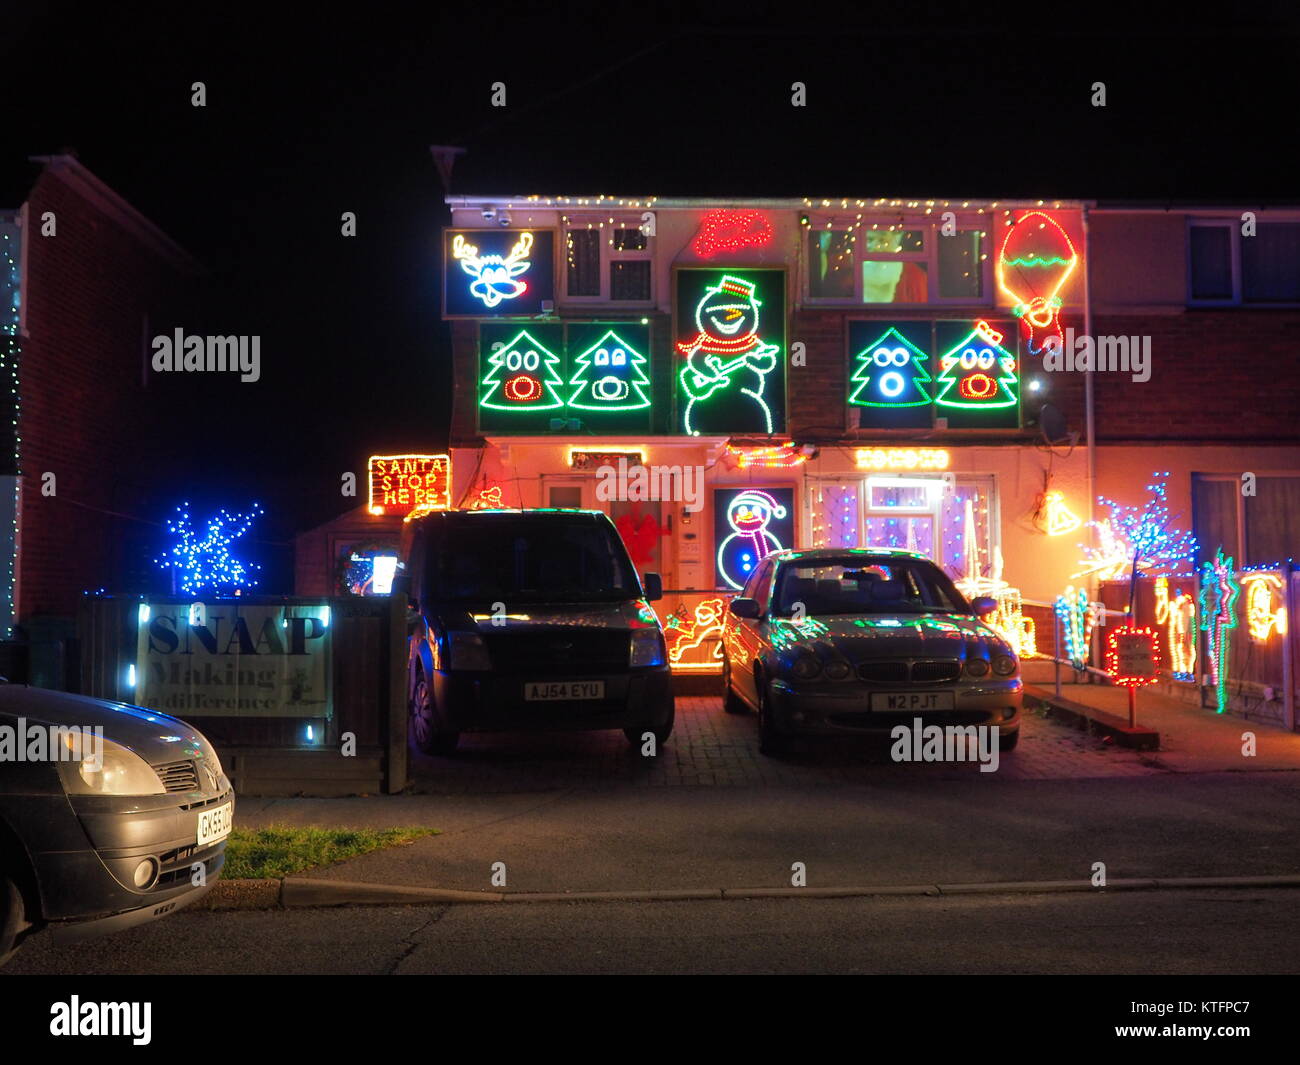 Minster on sea, Kent, UK. 24th Dec, 2017. A colourful Christmas lighting display on a house in Minster on sea. Donations are given to the Kent based SNAAP charity for disabled children. Credit: James Bell/Alamy Live News Stock Photo